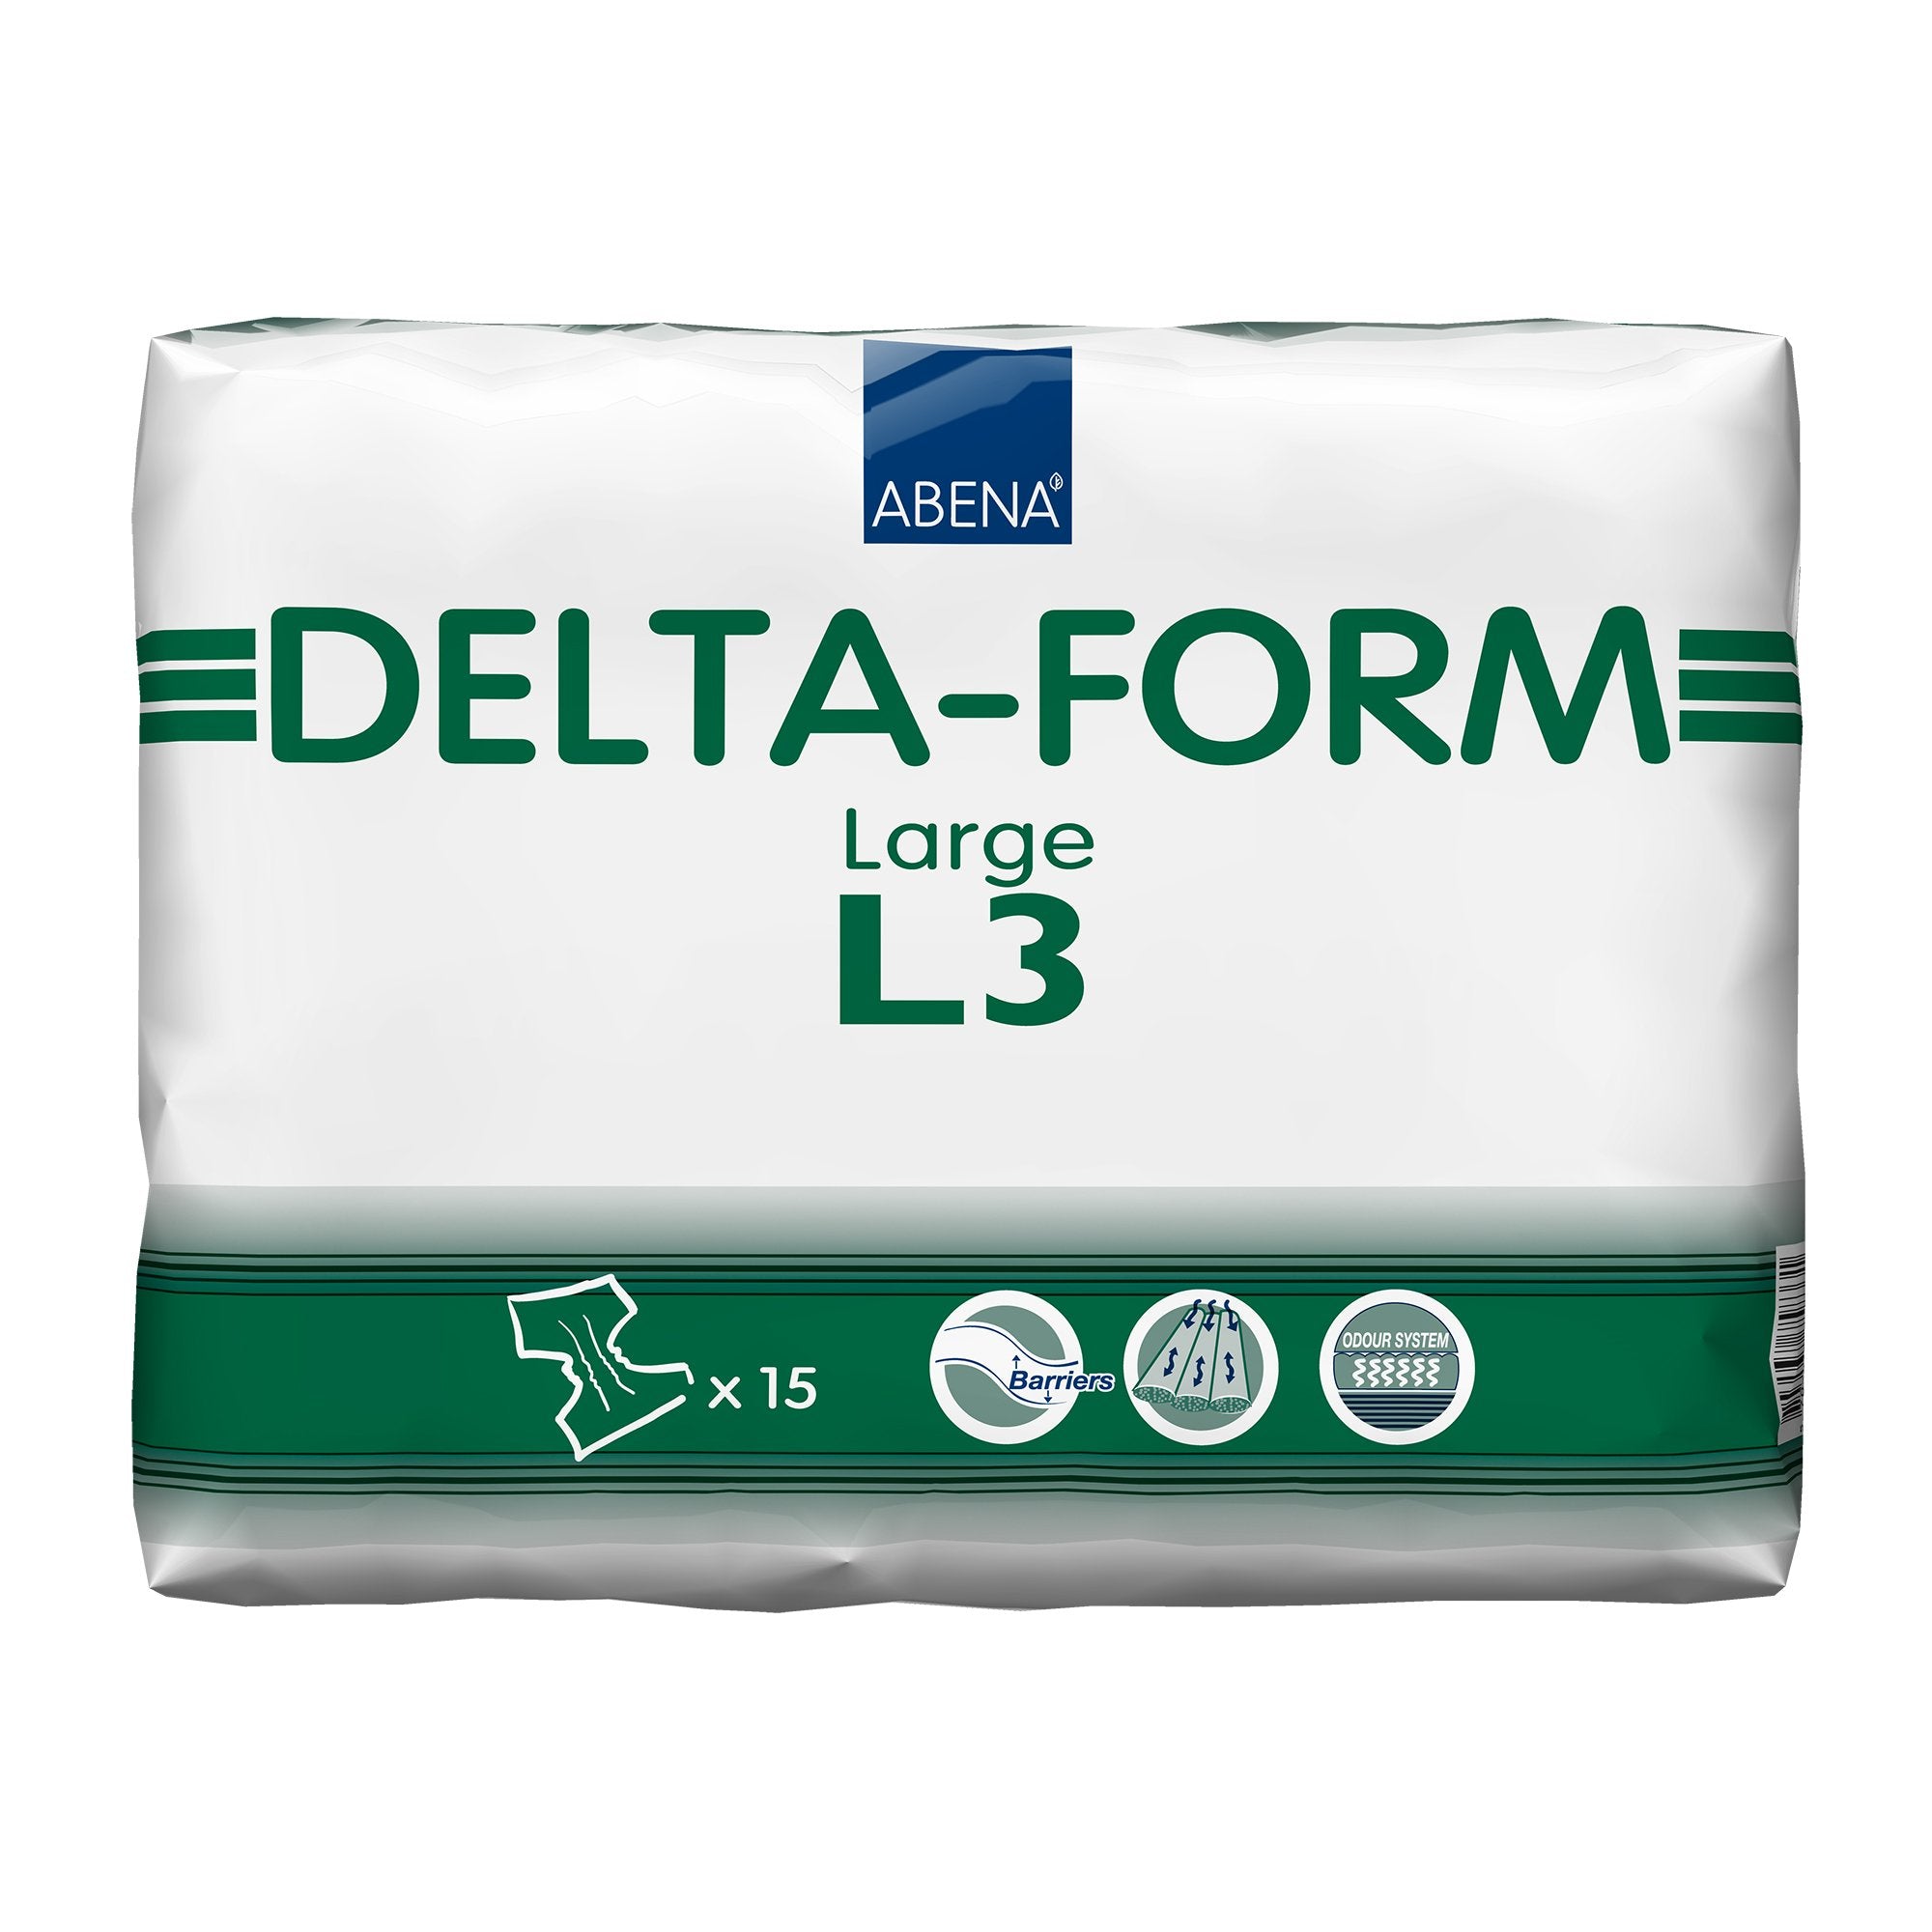 Unisex Adult Incontinence Brief Abena® Delta-Form Large Disposable Heavy Absorbency